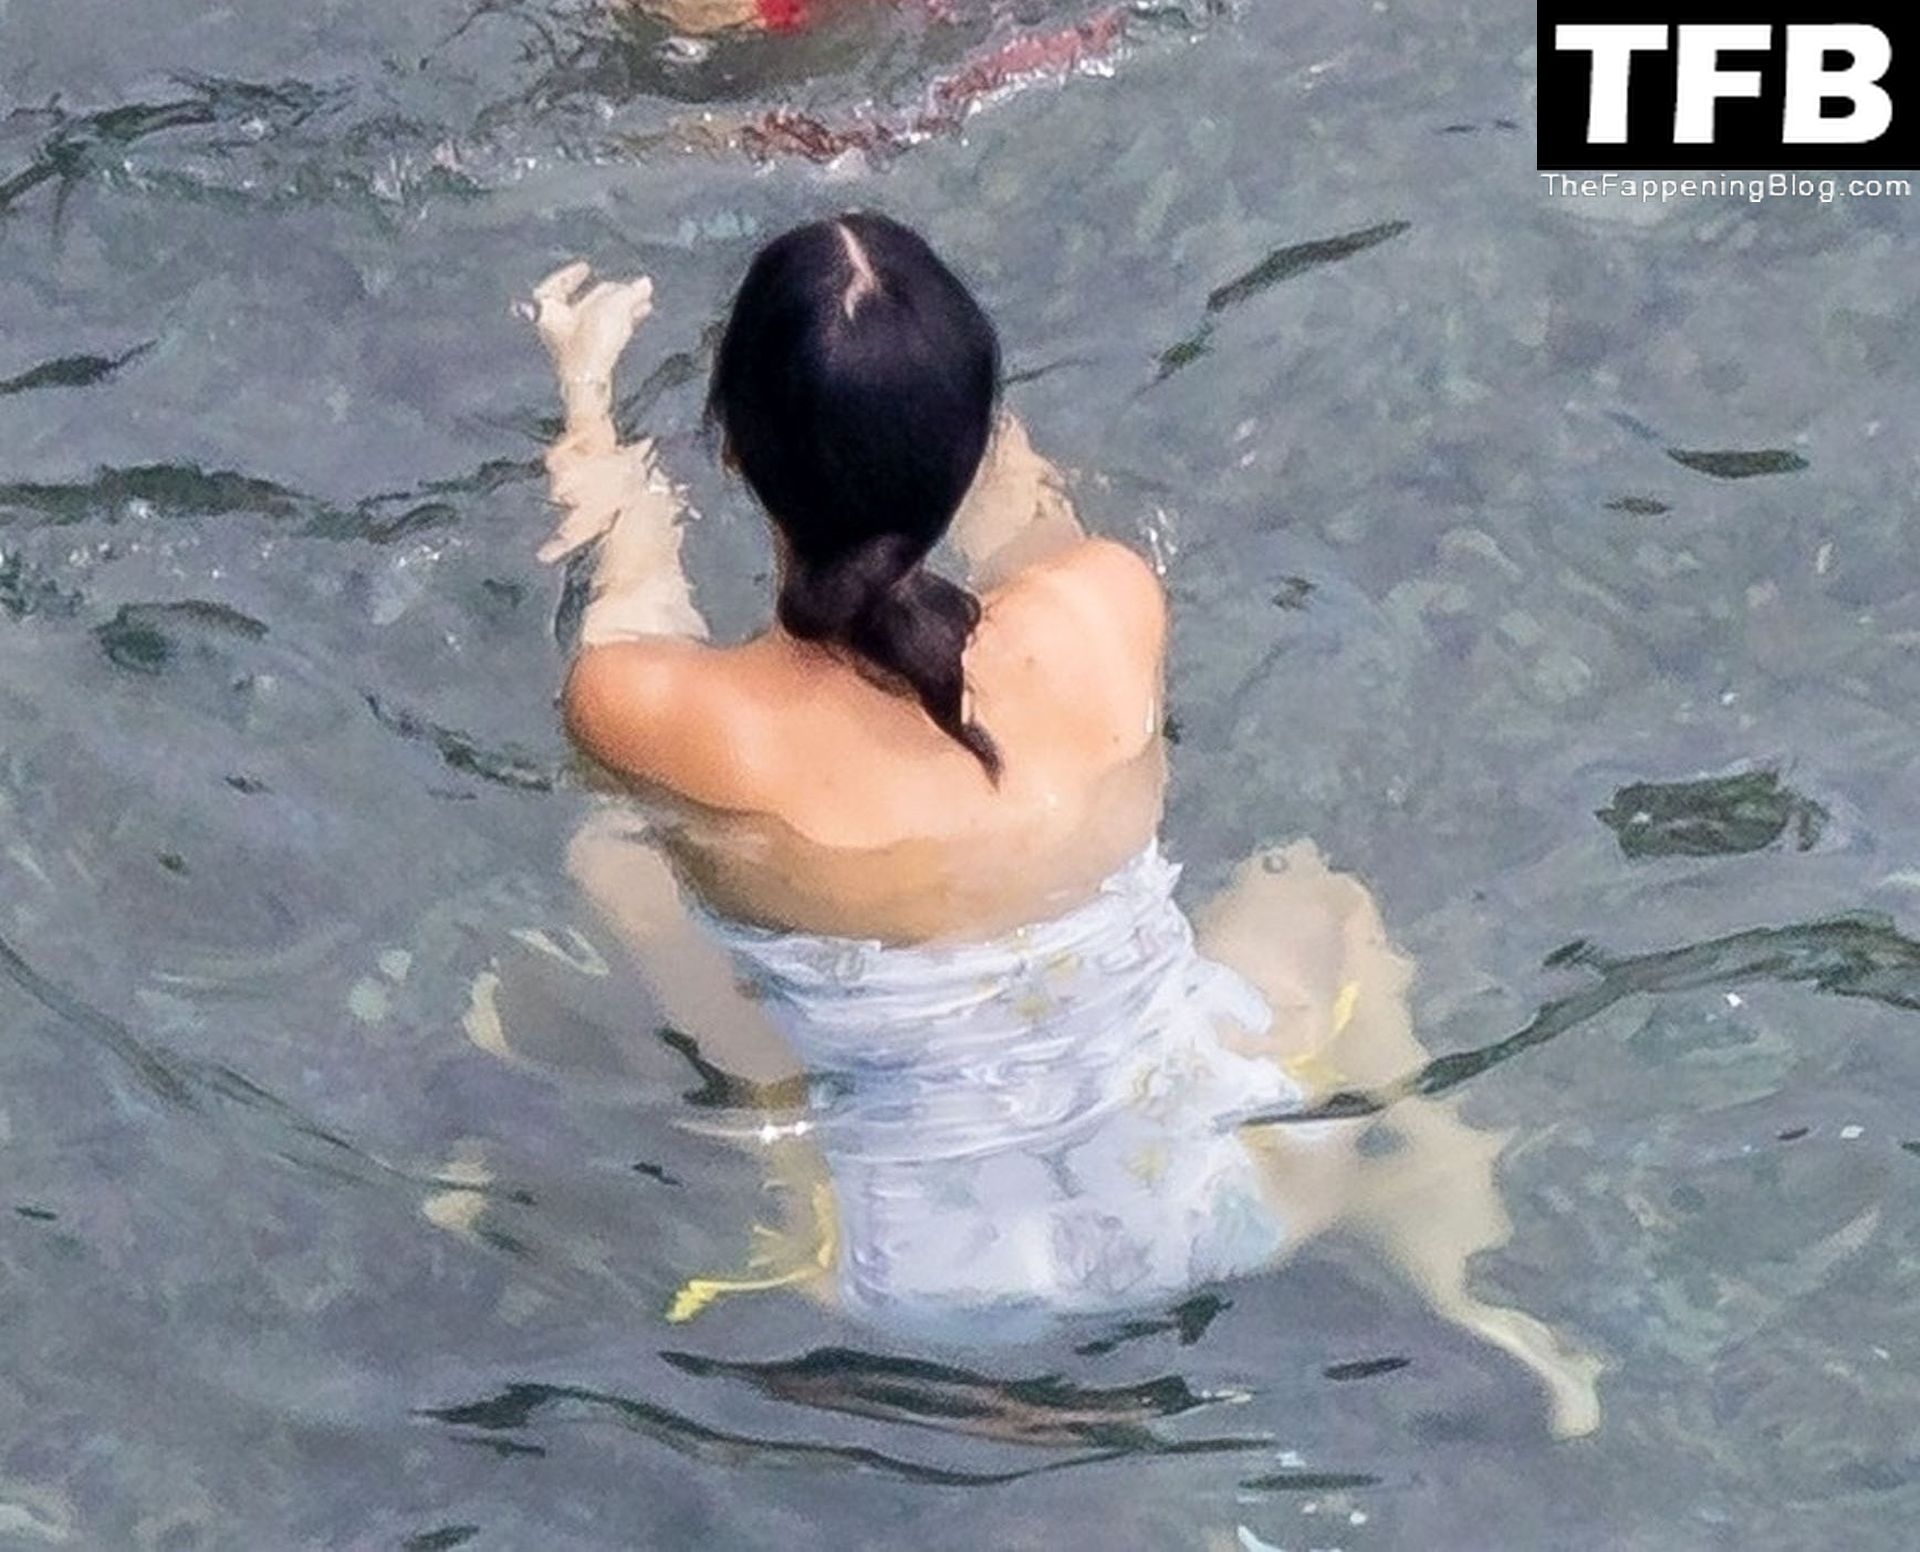 Katy Perry Sexy The Fappening Blog 15 - Katy Perry Rocks a Strapless Swimsuit While Enjoying a Beach Day with Orlando Bloom in Positano (105 Photos)